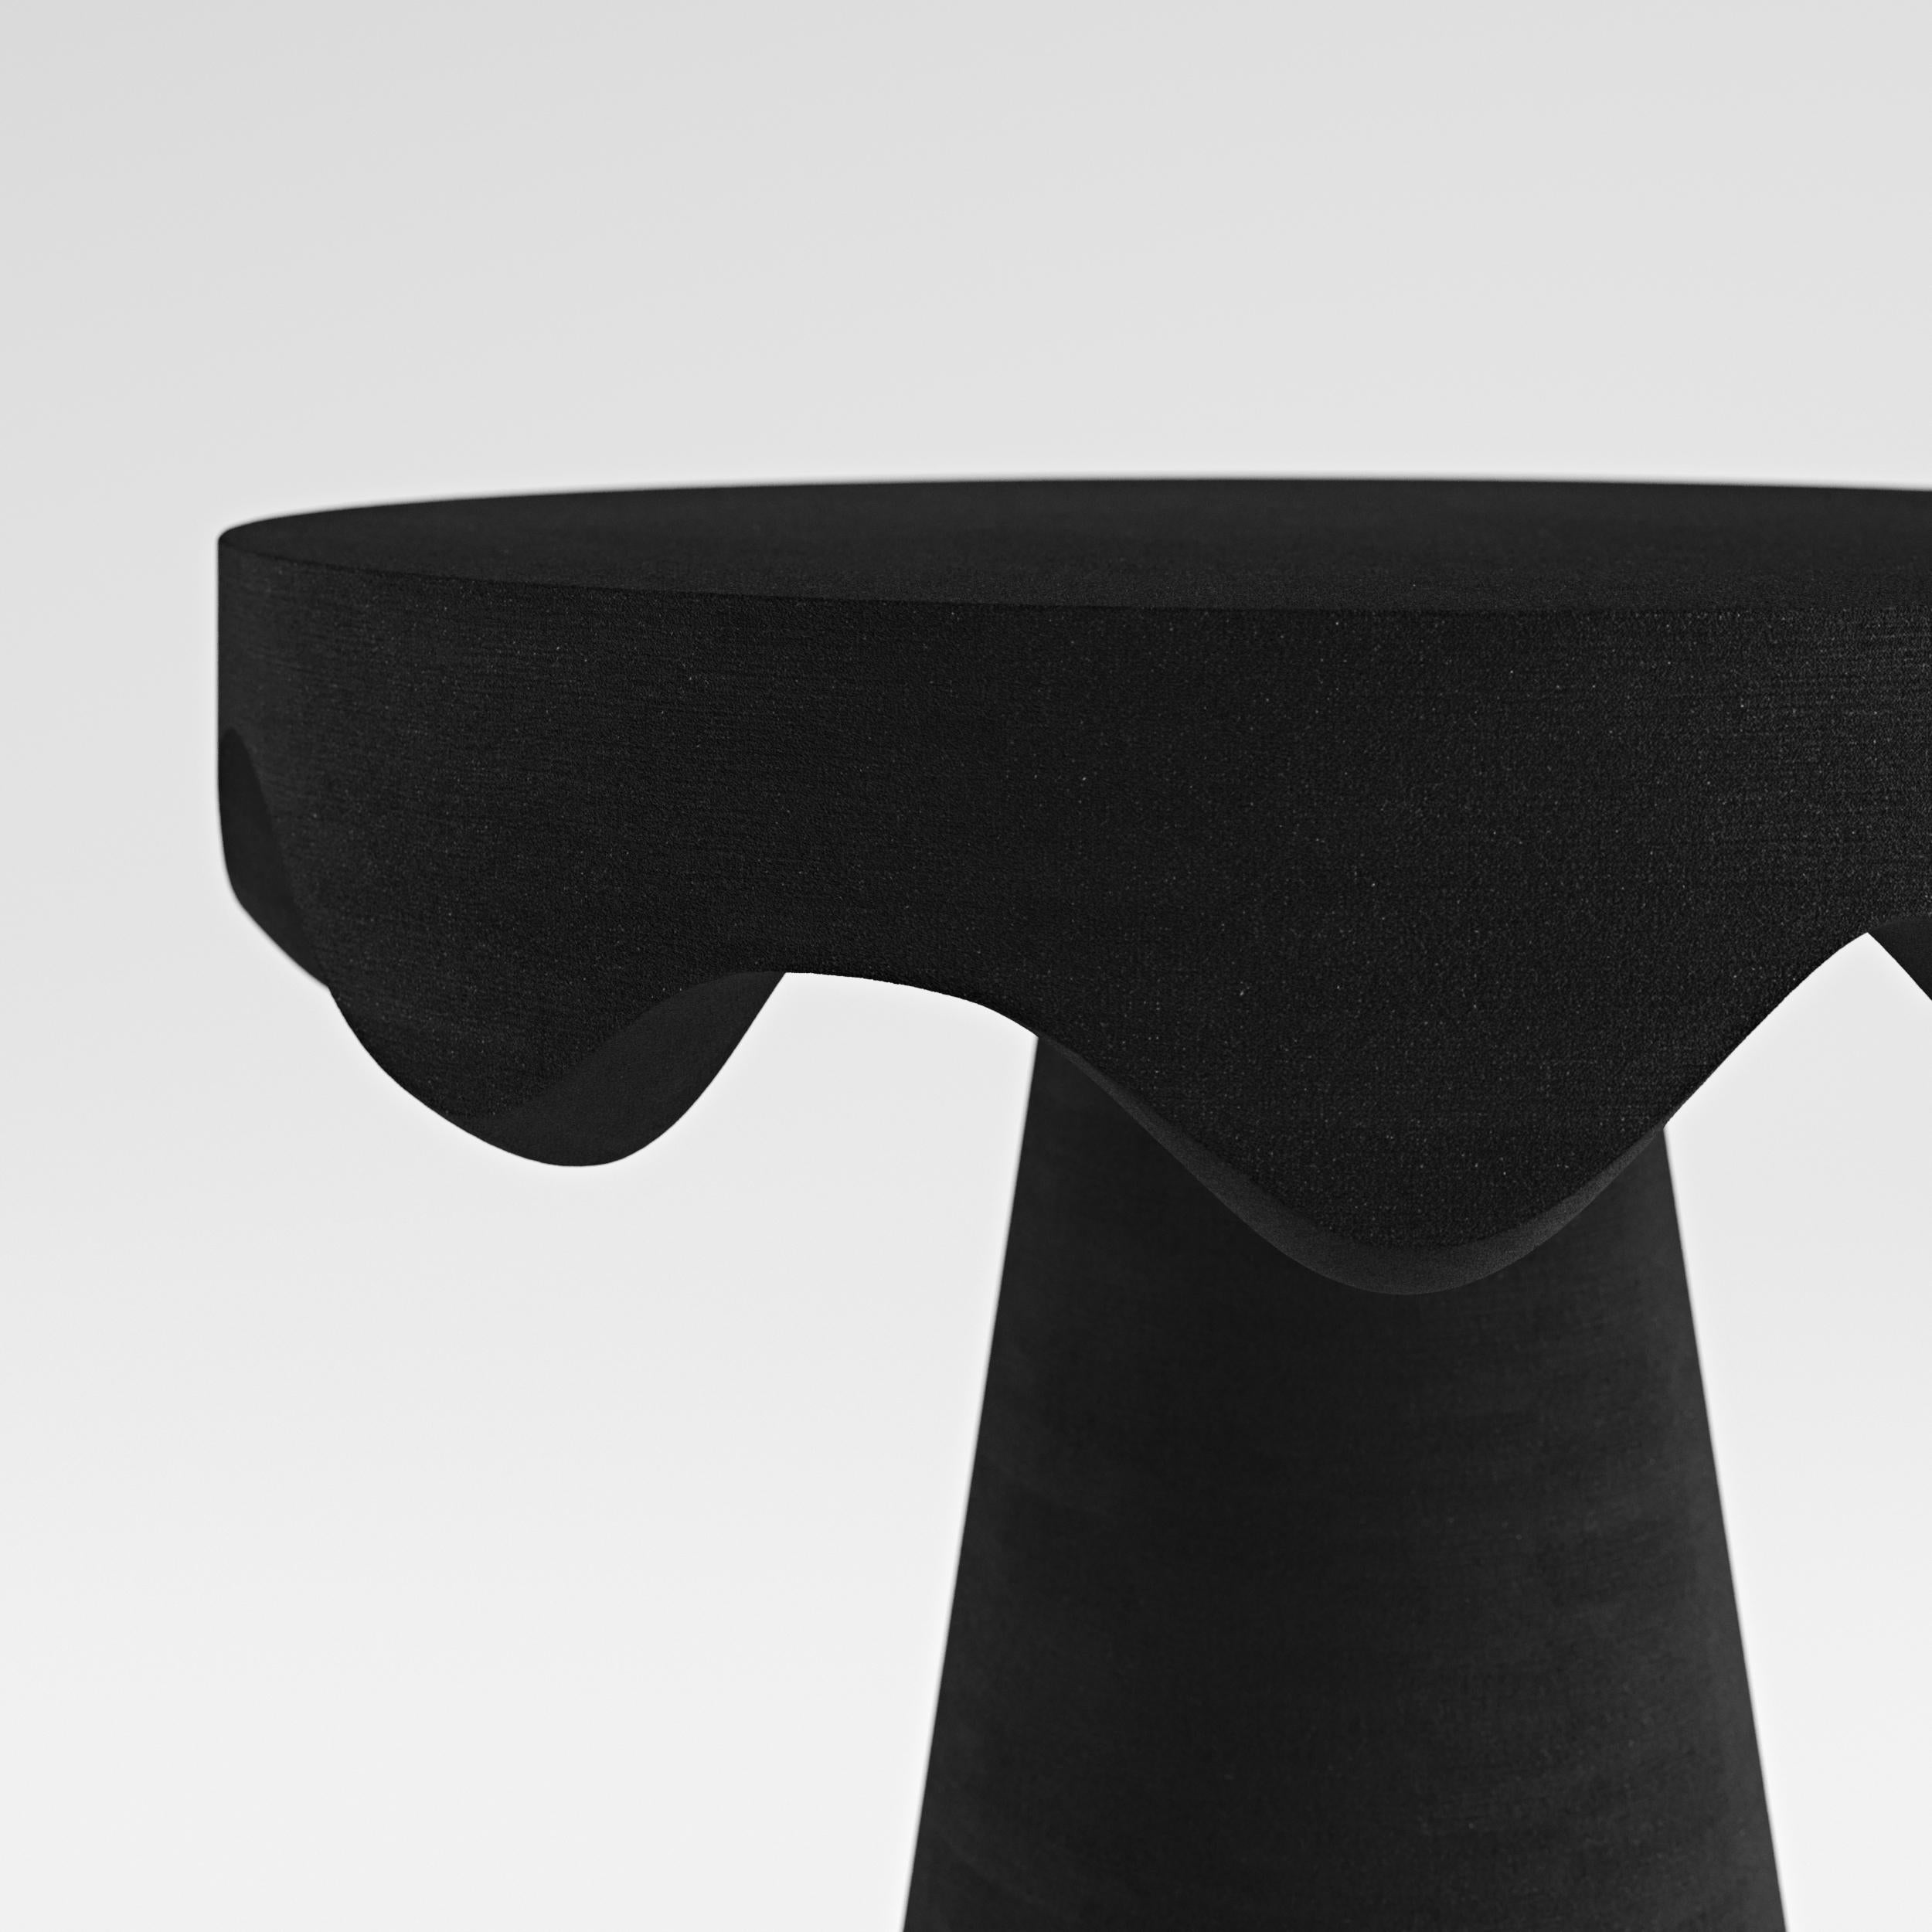  Dripotlé Quartz Sand Coffee Table by T. Woon Black Customisable In New Condition For Sale In Stockholm, SE